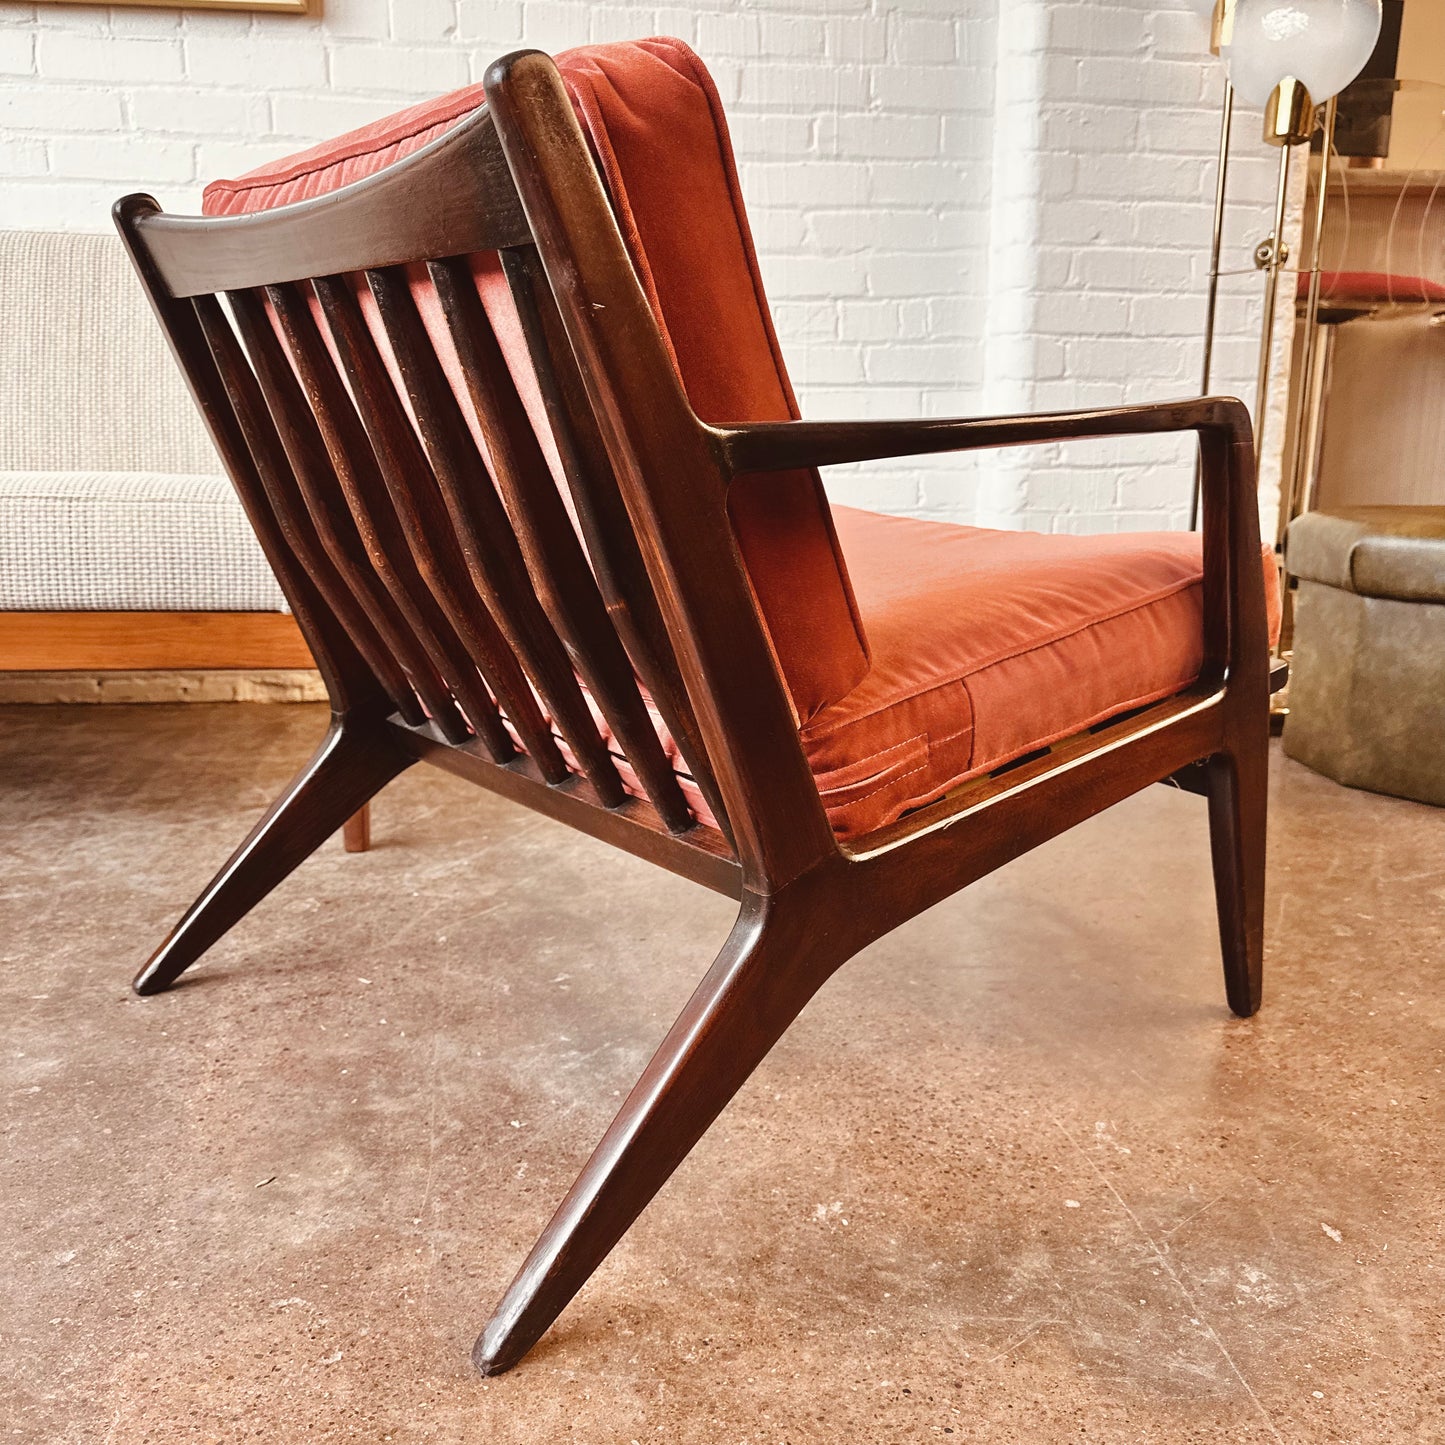 LAWRENCE PEABODY WALNUT ARM CHAIR FOR SELIG, MODEL 596